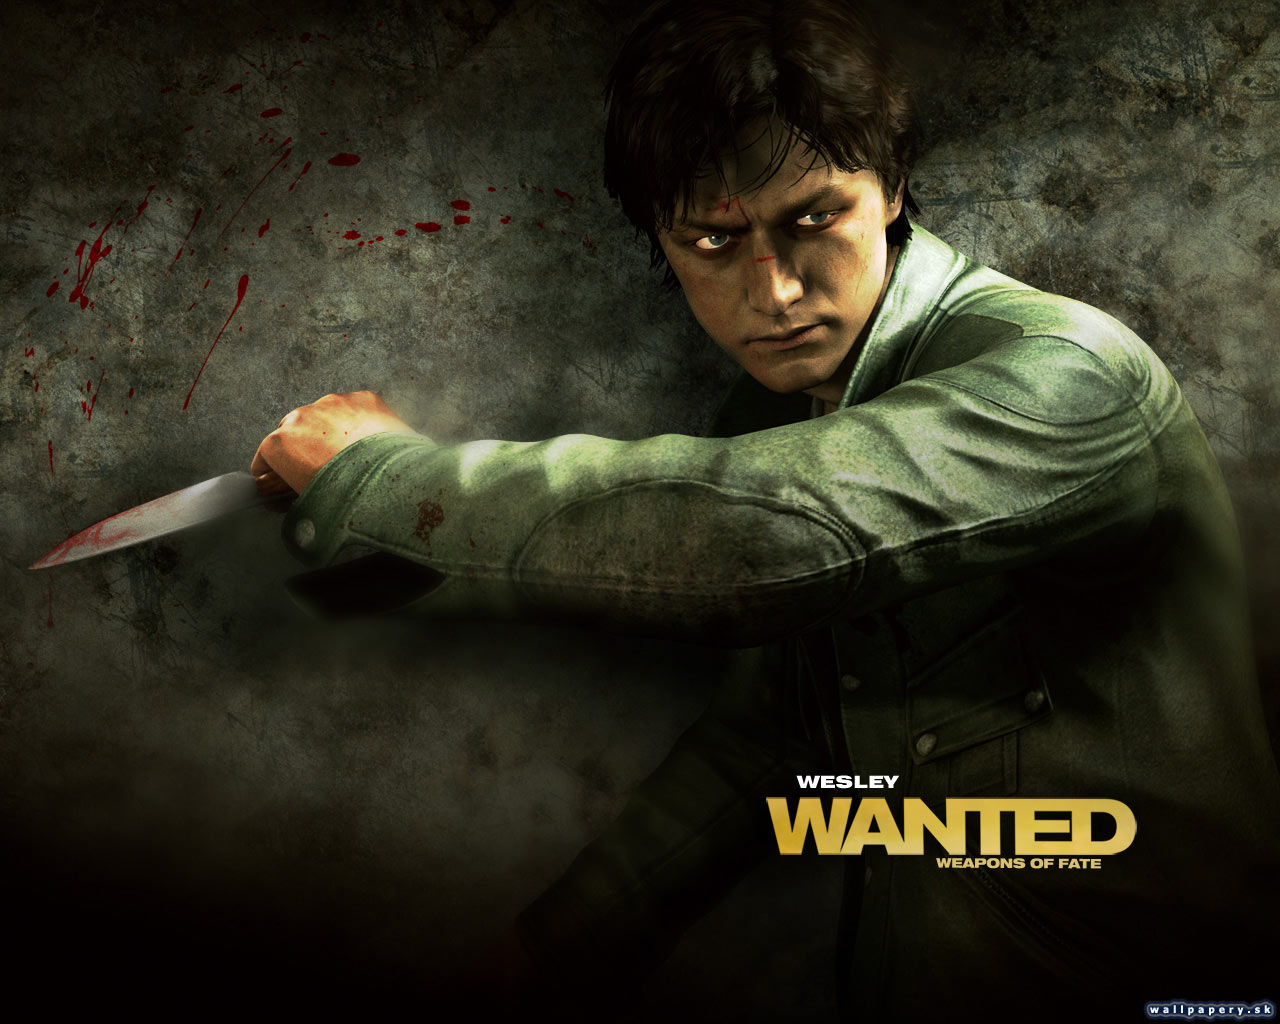 Wanted: Weapons of Fate - wallpaper 24